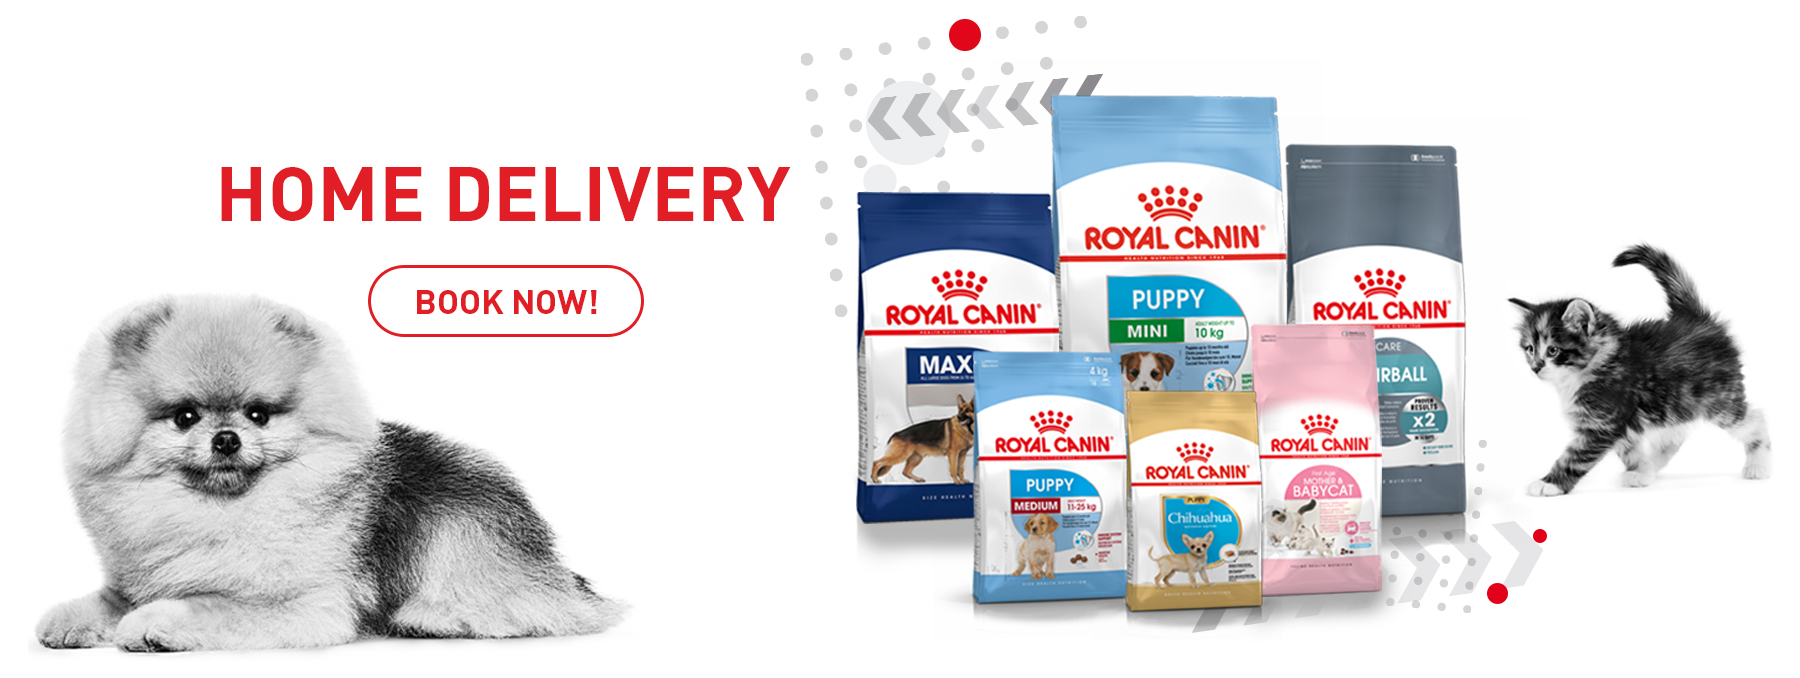 Home Delivery Option - Royal Canin